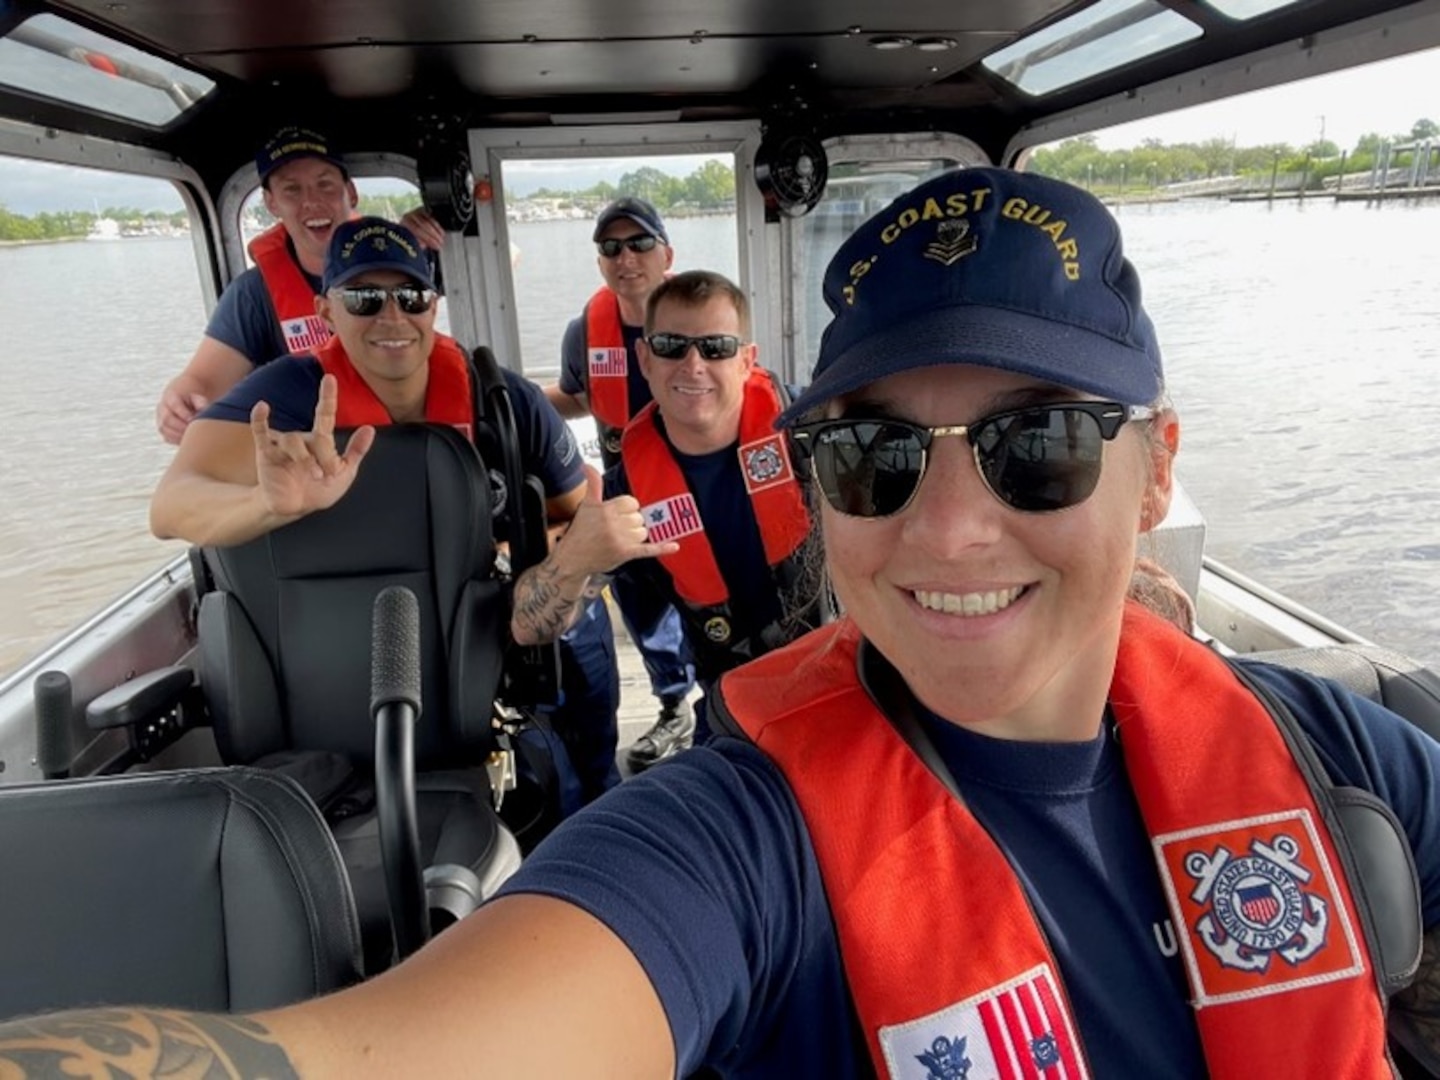 Petty Officer 1st Class Hannah Hall poses with her crew from Coast Guard Station Georgetown, South Carolina, before leaving the dock for a recent law enforcement patrol. Hall is Coast Guard’s 2022 Reserve Enlisted Person of the Year due to her superior leadership and performance.